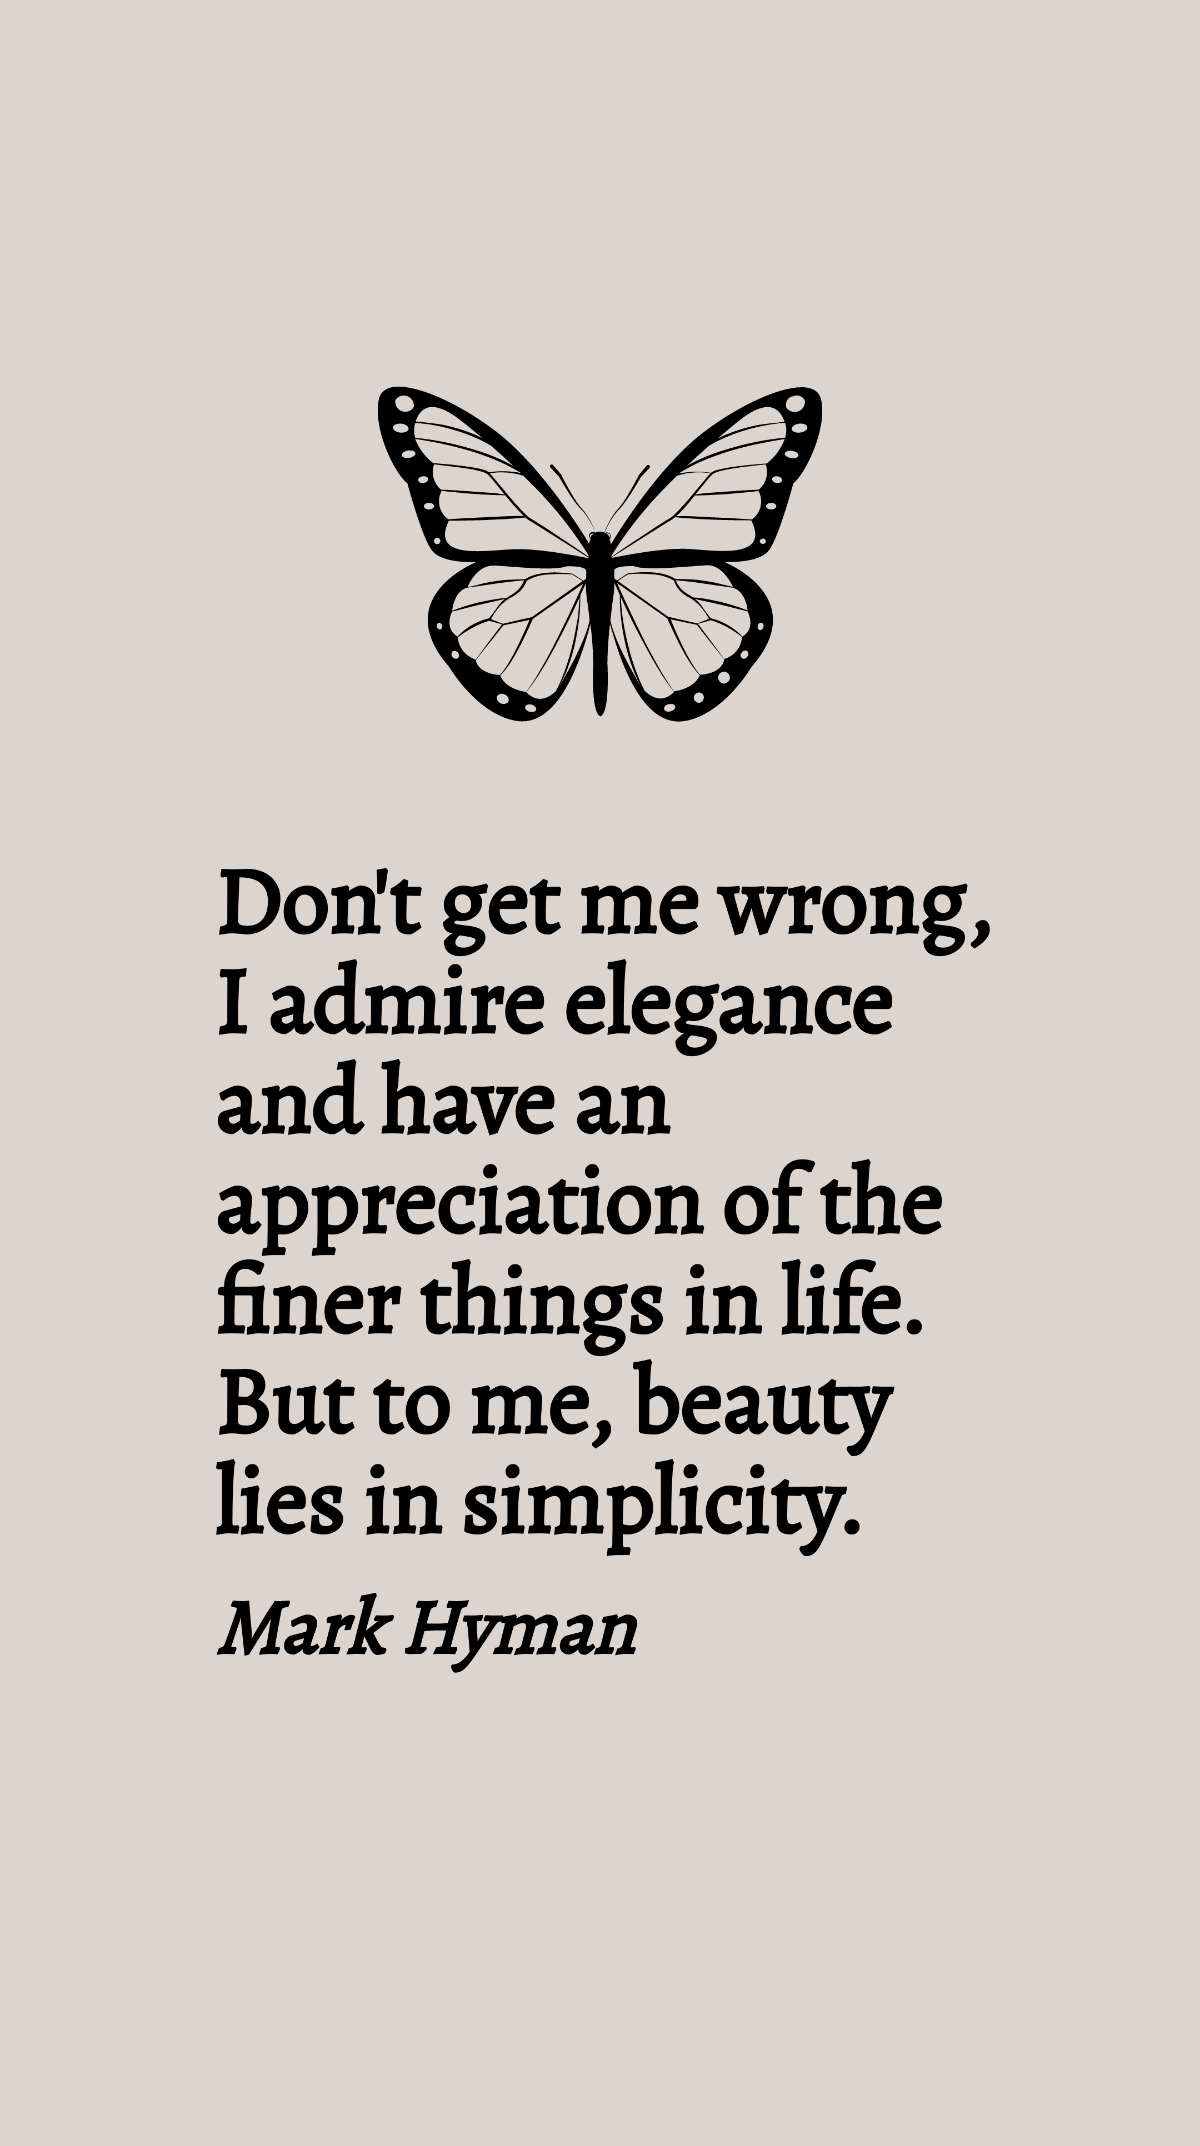 Mark Hyman - Don't get me wrong, I admire elegance and have an appreciation of the finer things in life. But to me, beauty lies in simplicity.